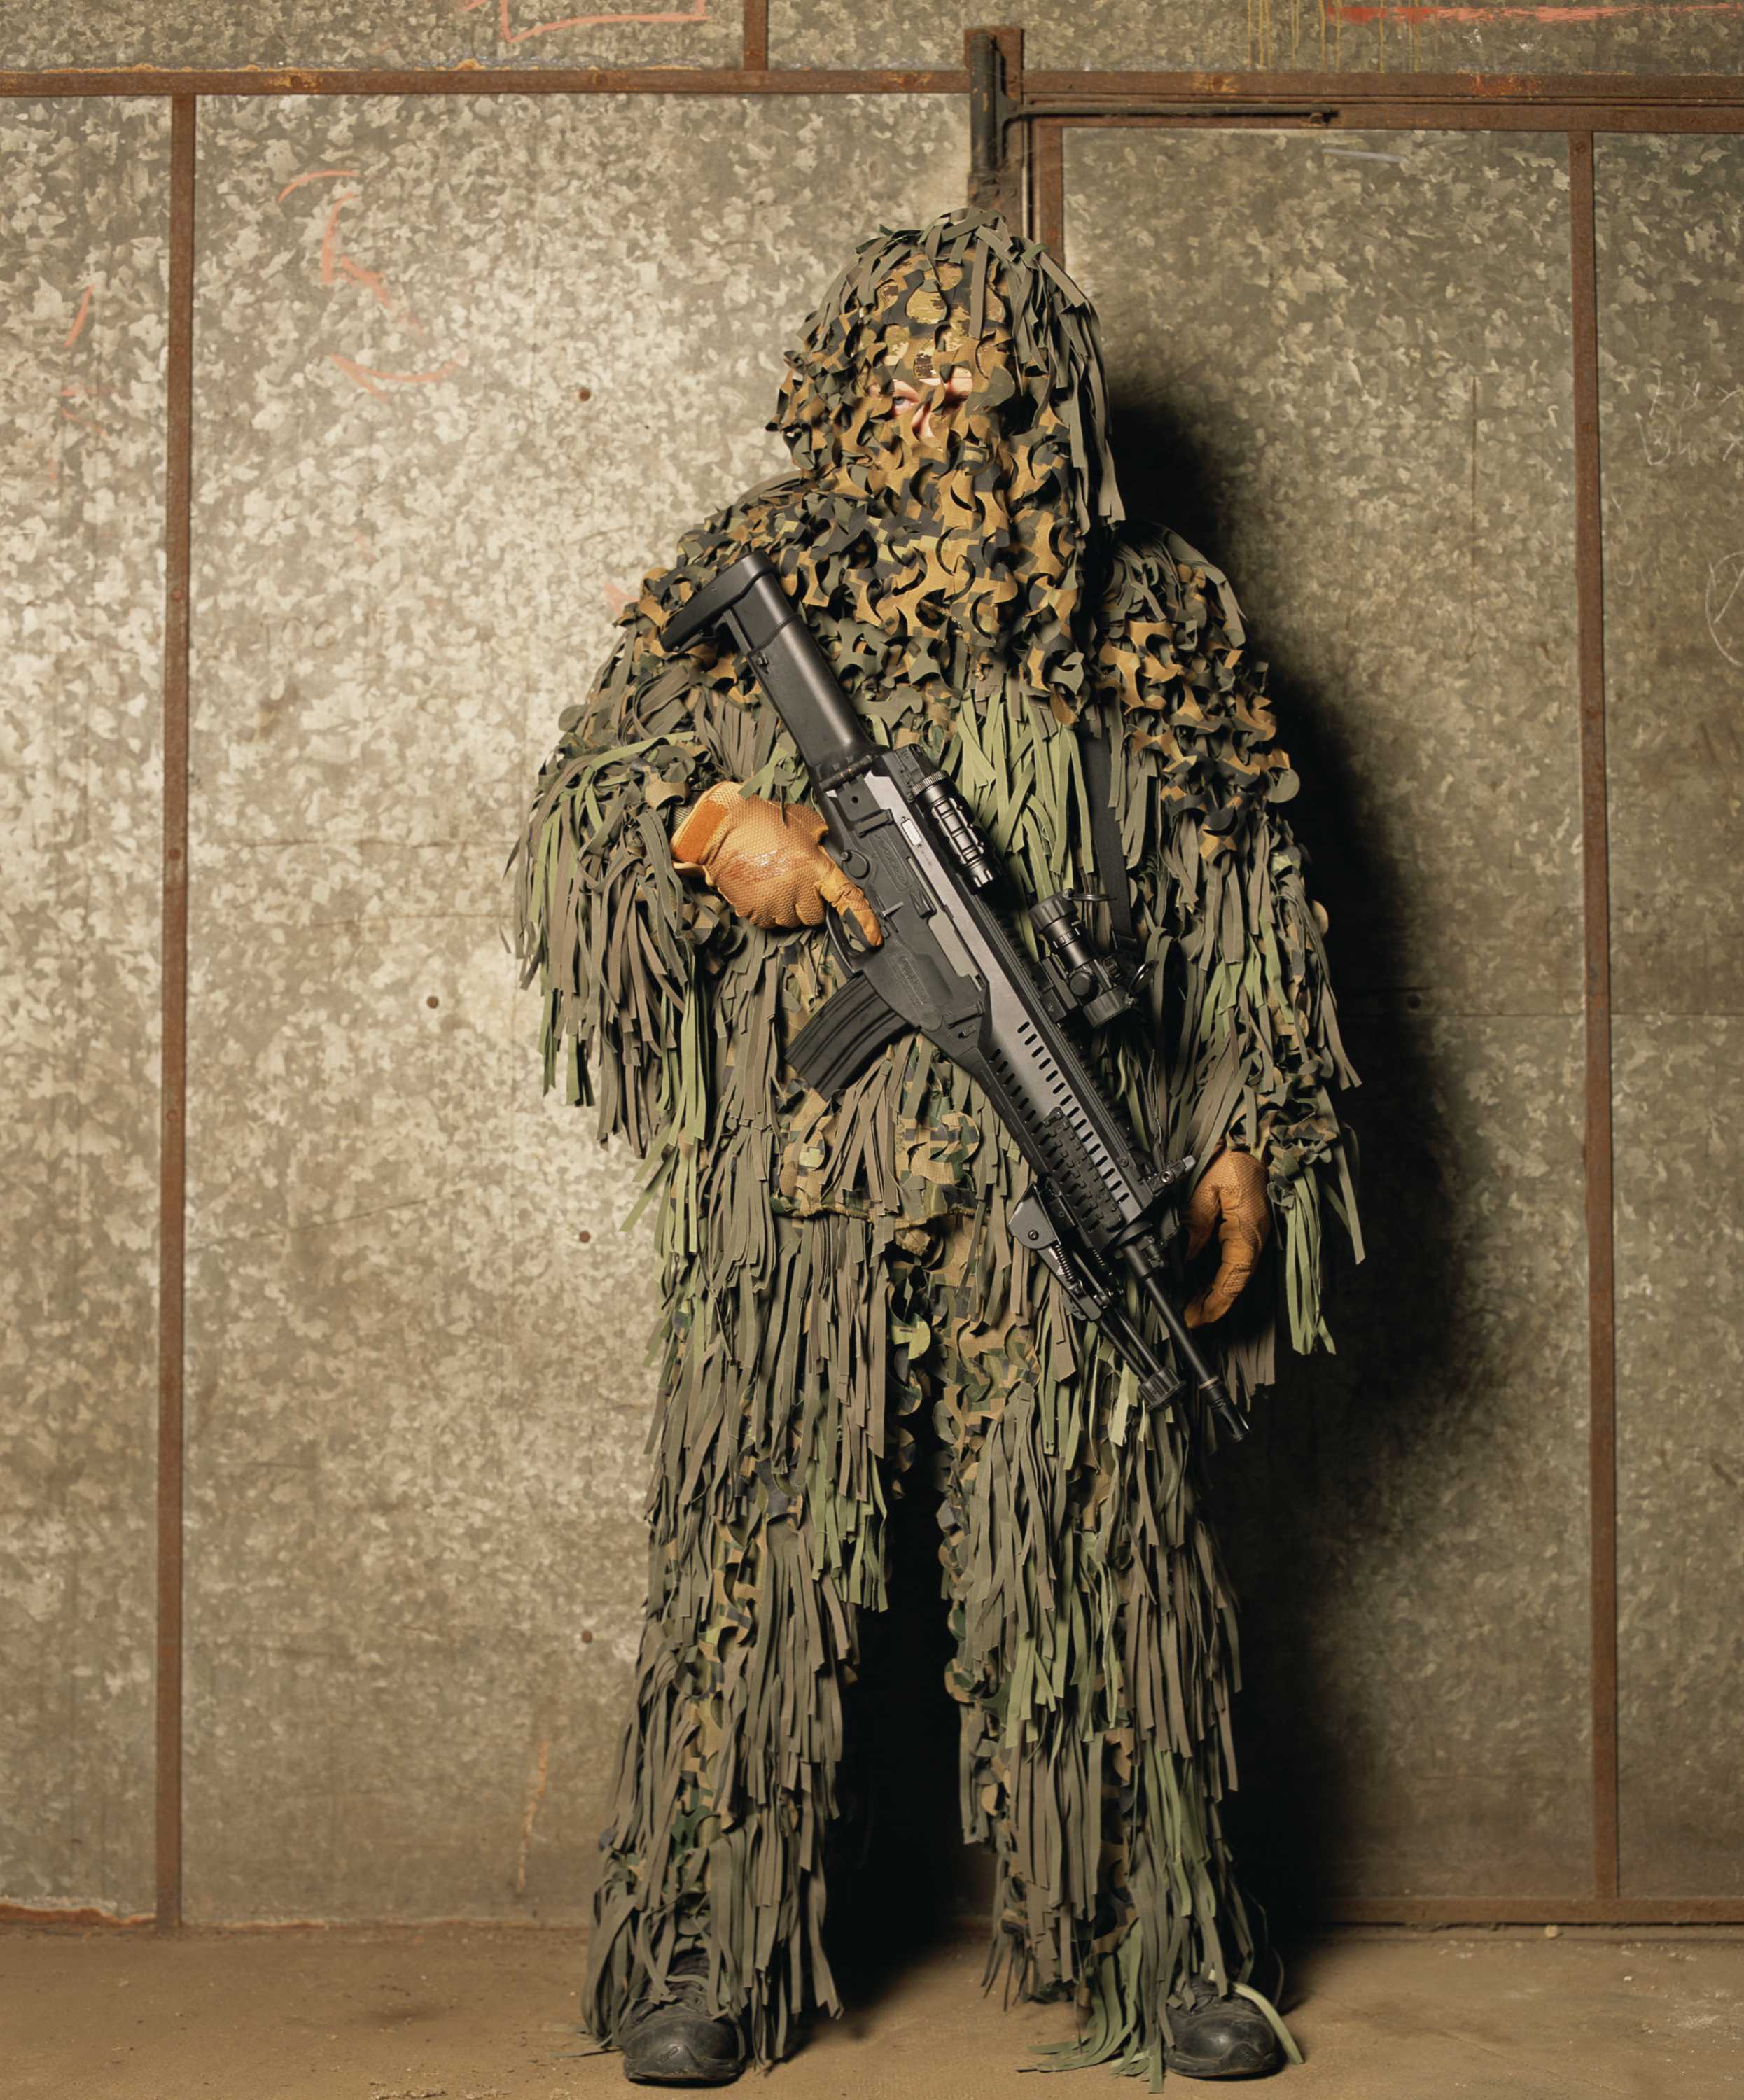 A photograph by the artist Andres Serrano titled 'Man in Camouflage Suit'. It features a person in a green camouflage suit that mimics the texture of a tree. They are holding an assault rifle and stand against a concrete wall.